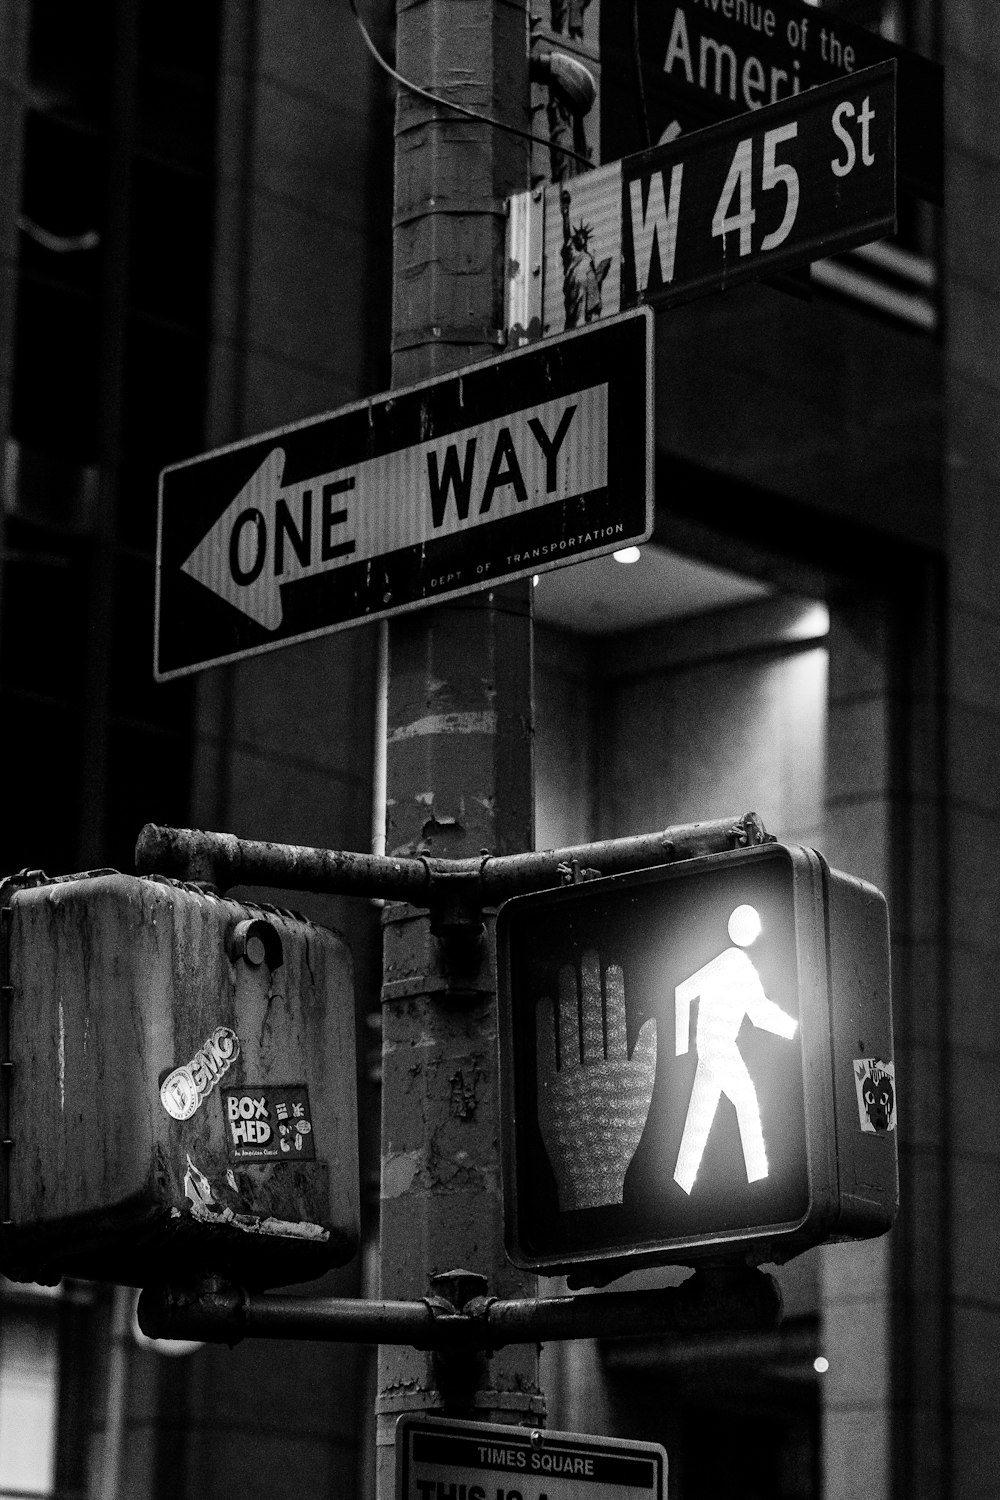 a black and white photo of a one way sign